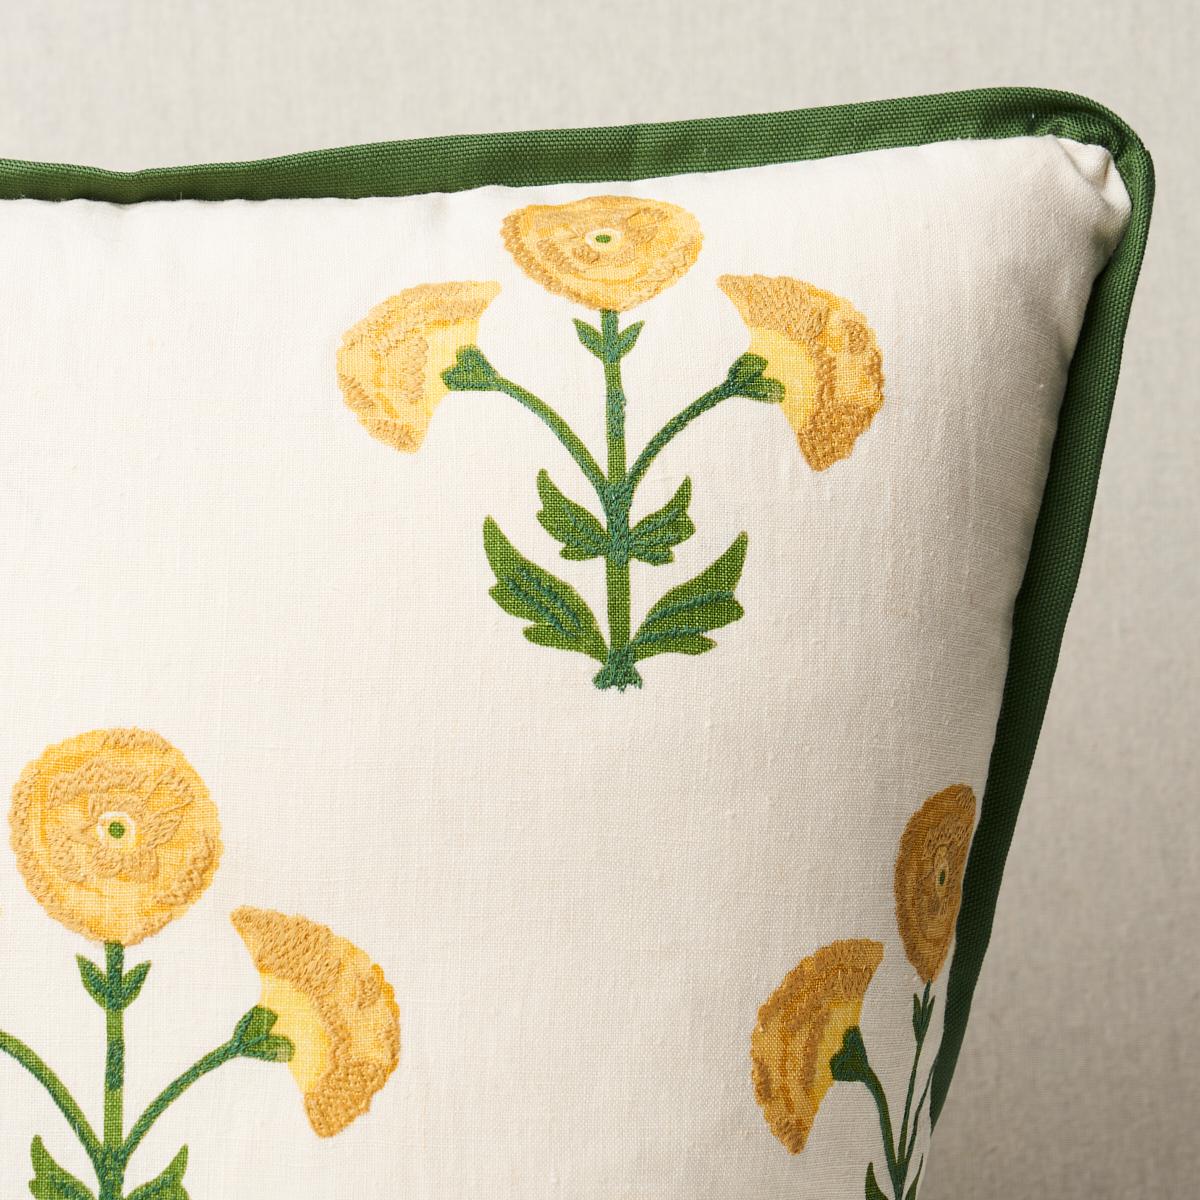 This pillow features Saranda Flower and is finished with a flange in Elliott Brushed Cotton. Inspired by traditional Indian hand-block designs, this marigold-colored Saranda Flower Embroidery features stylized flowers handprinted on a linen-ground